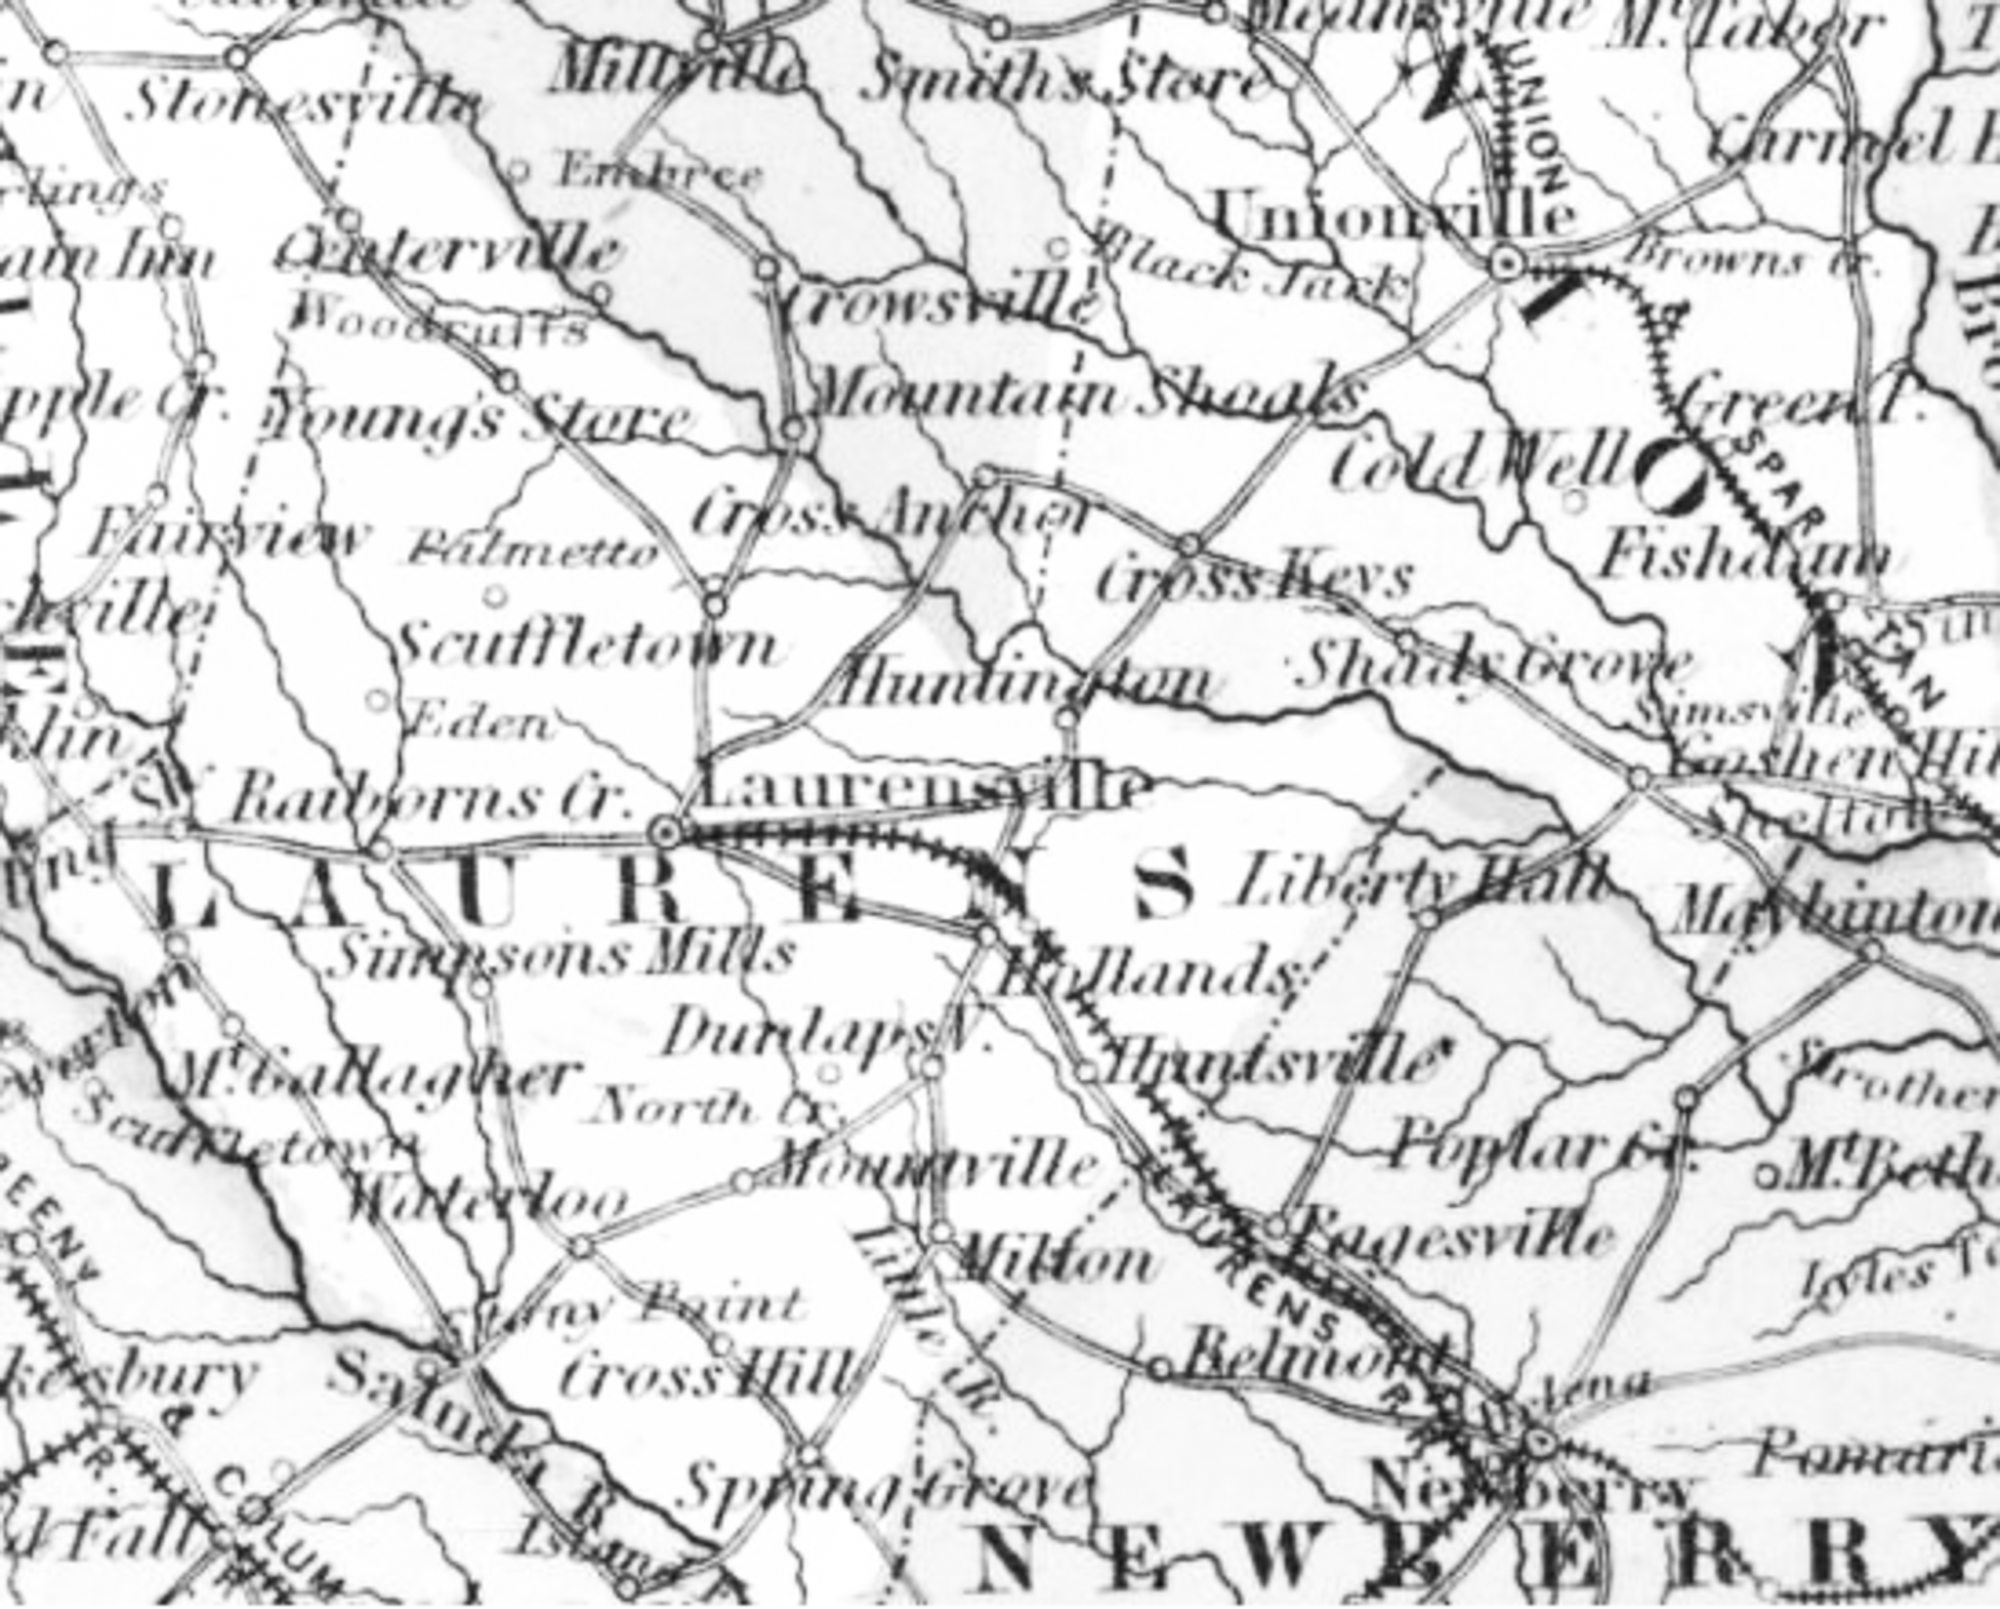 MAP EASTERN LAURENS CO., SC - J.H. Colton Company, 1856